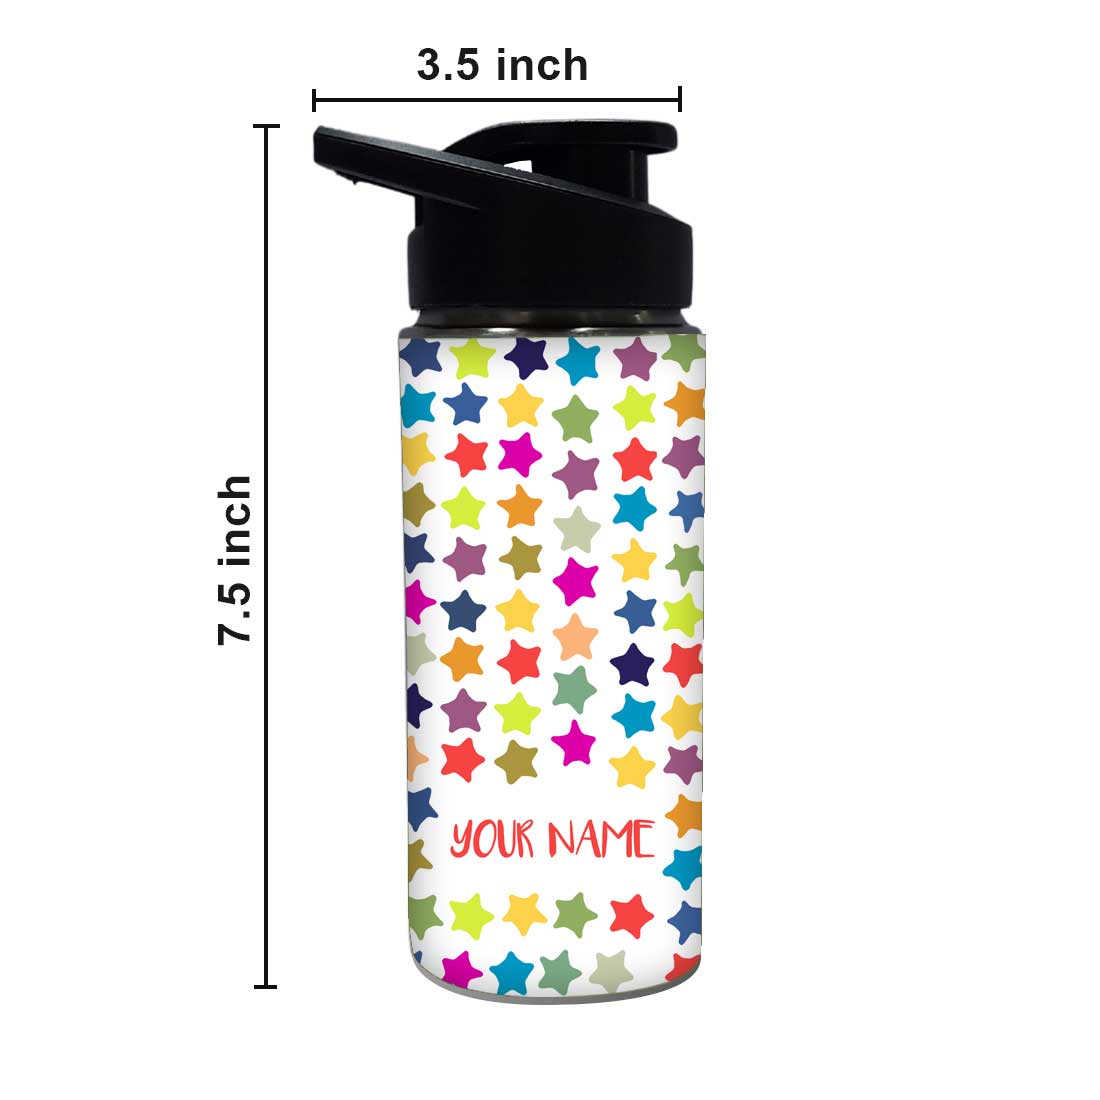 Personalized Bottle With Name - Multicolor Star Nutcase